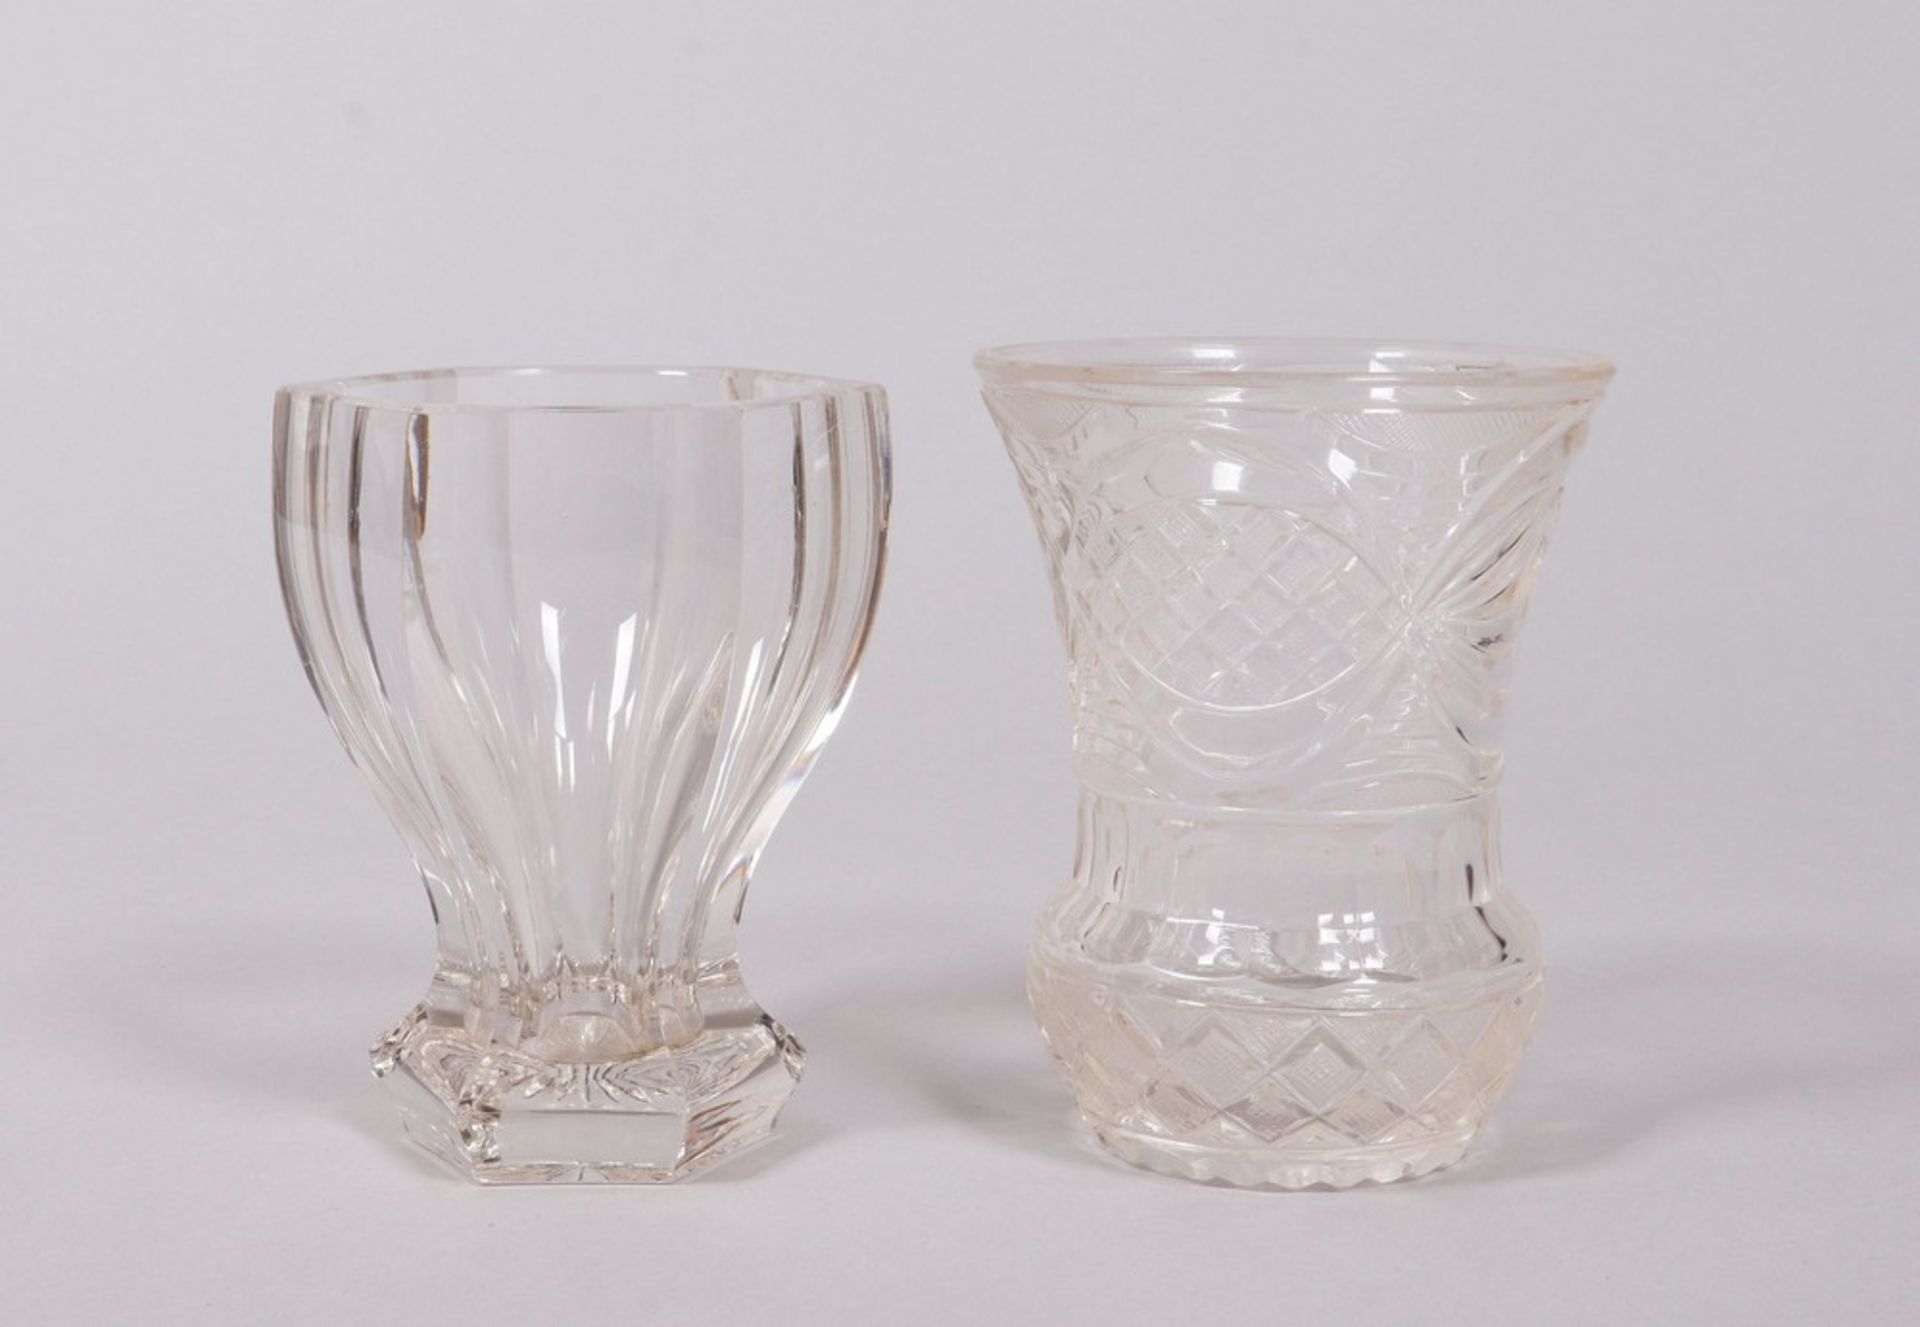 Mixed lot of Biedermeier glasses, 5 pieces, colorless, German, 19th C. - Image 2 of 6